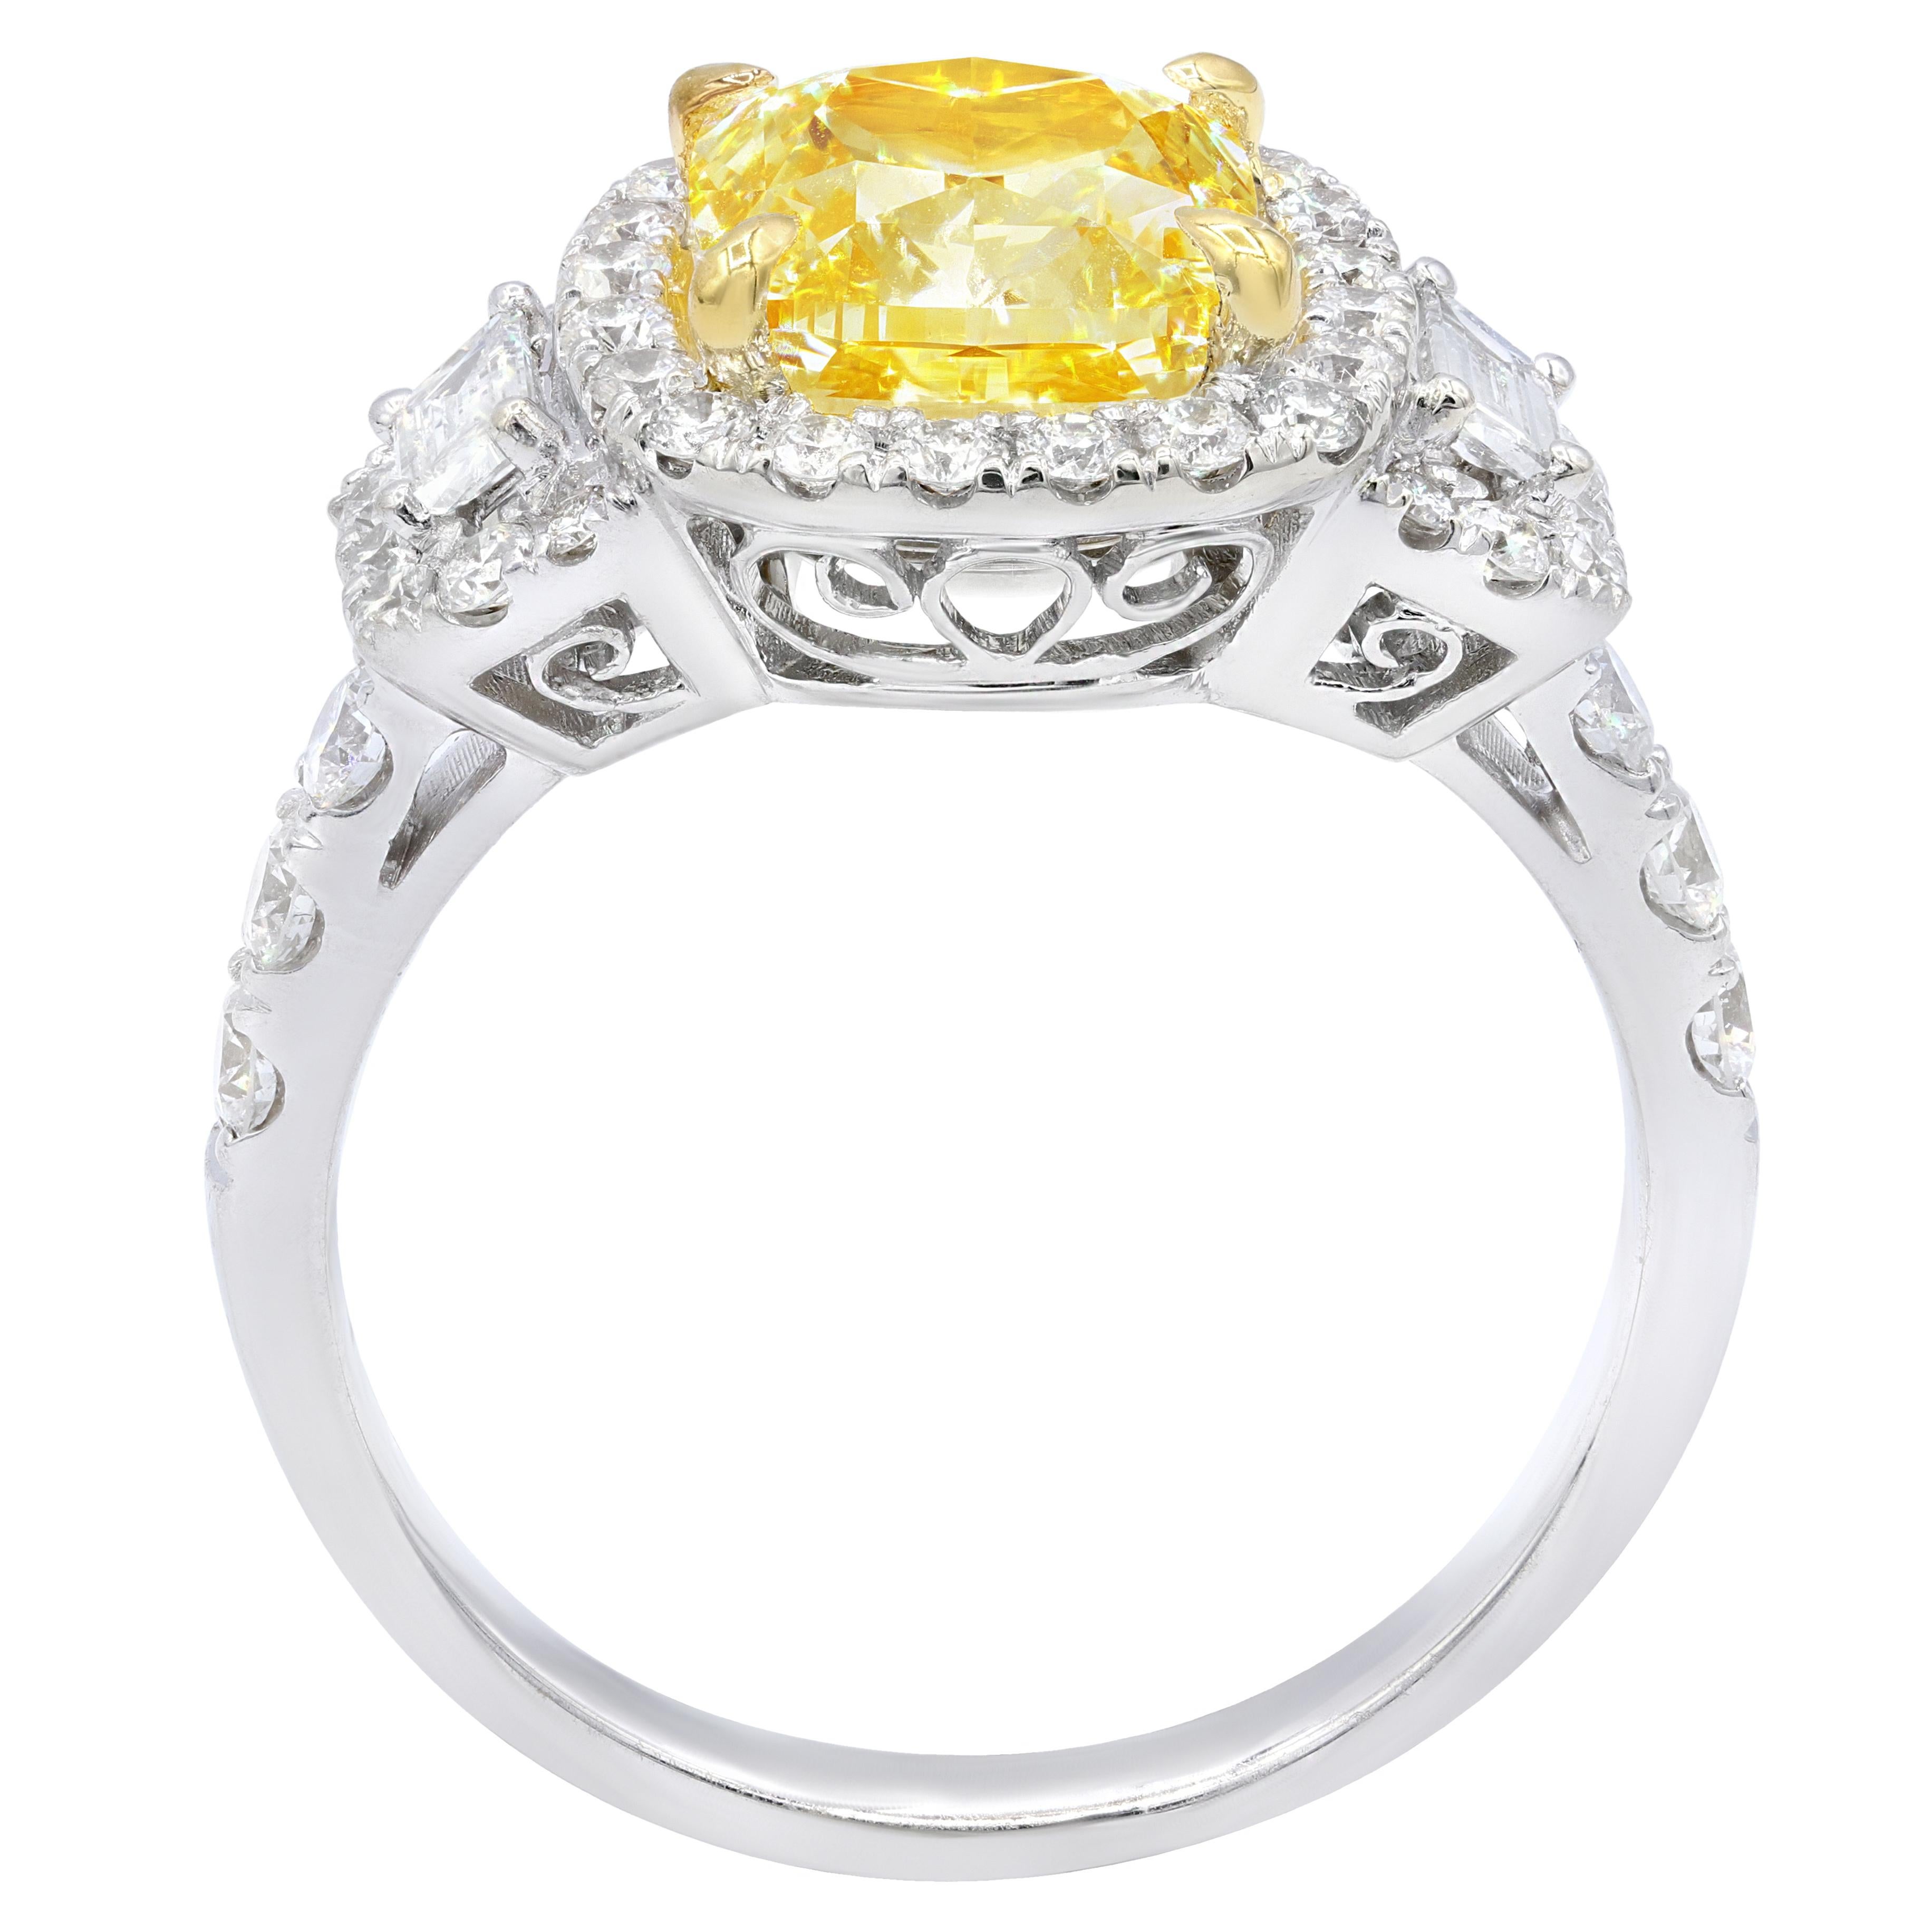 18K yellow gold fancy yellow diamond ring, features 2.39 ct fancy light yellow cushion cut diamond set in halo setting with two trapezoids 1.00 ct total weight of diamonds.